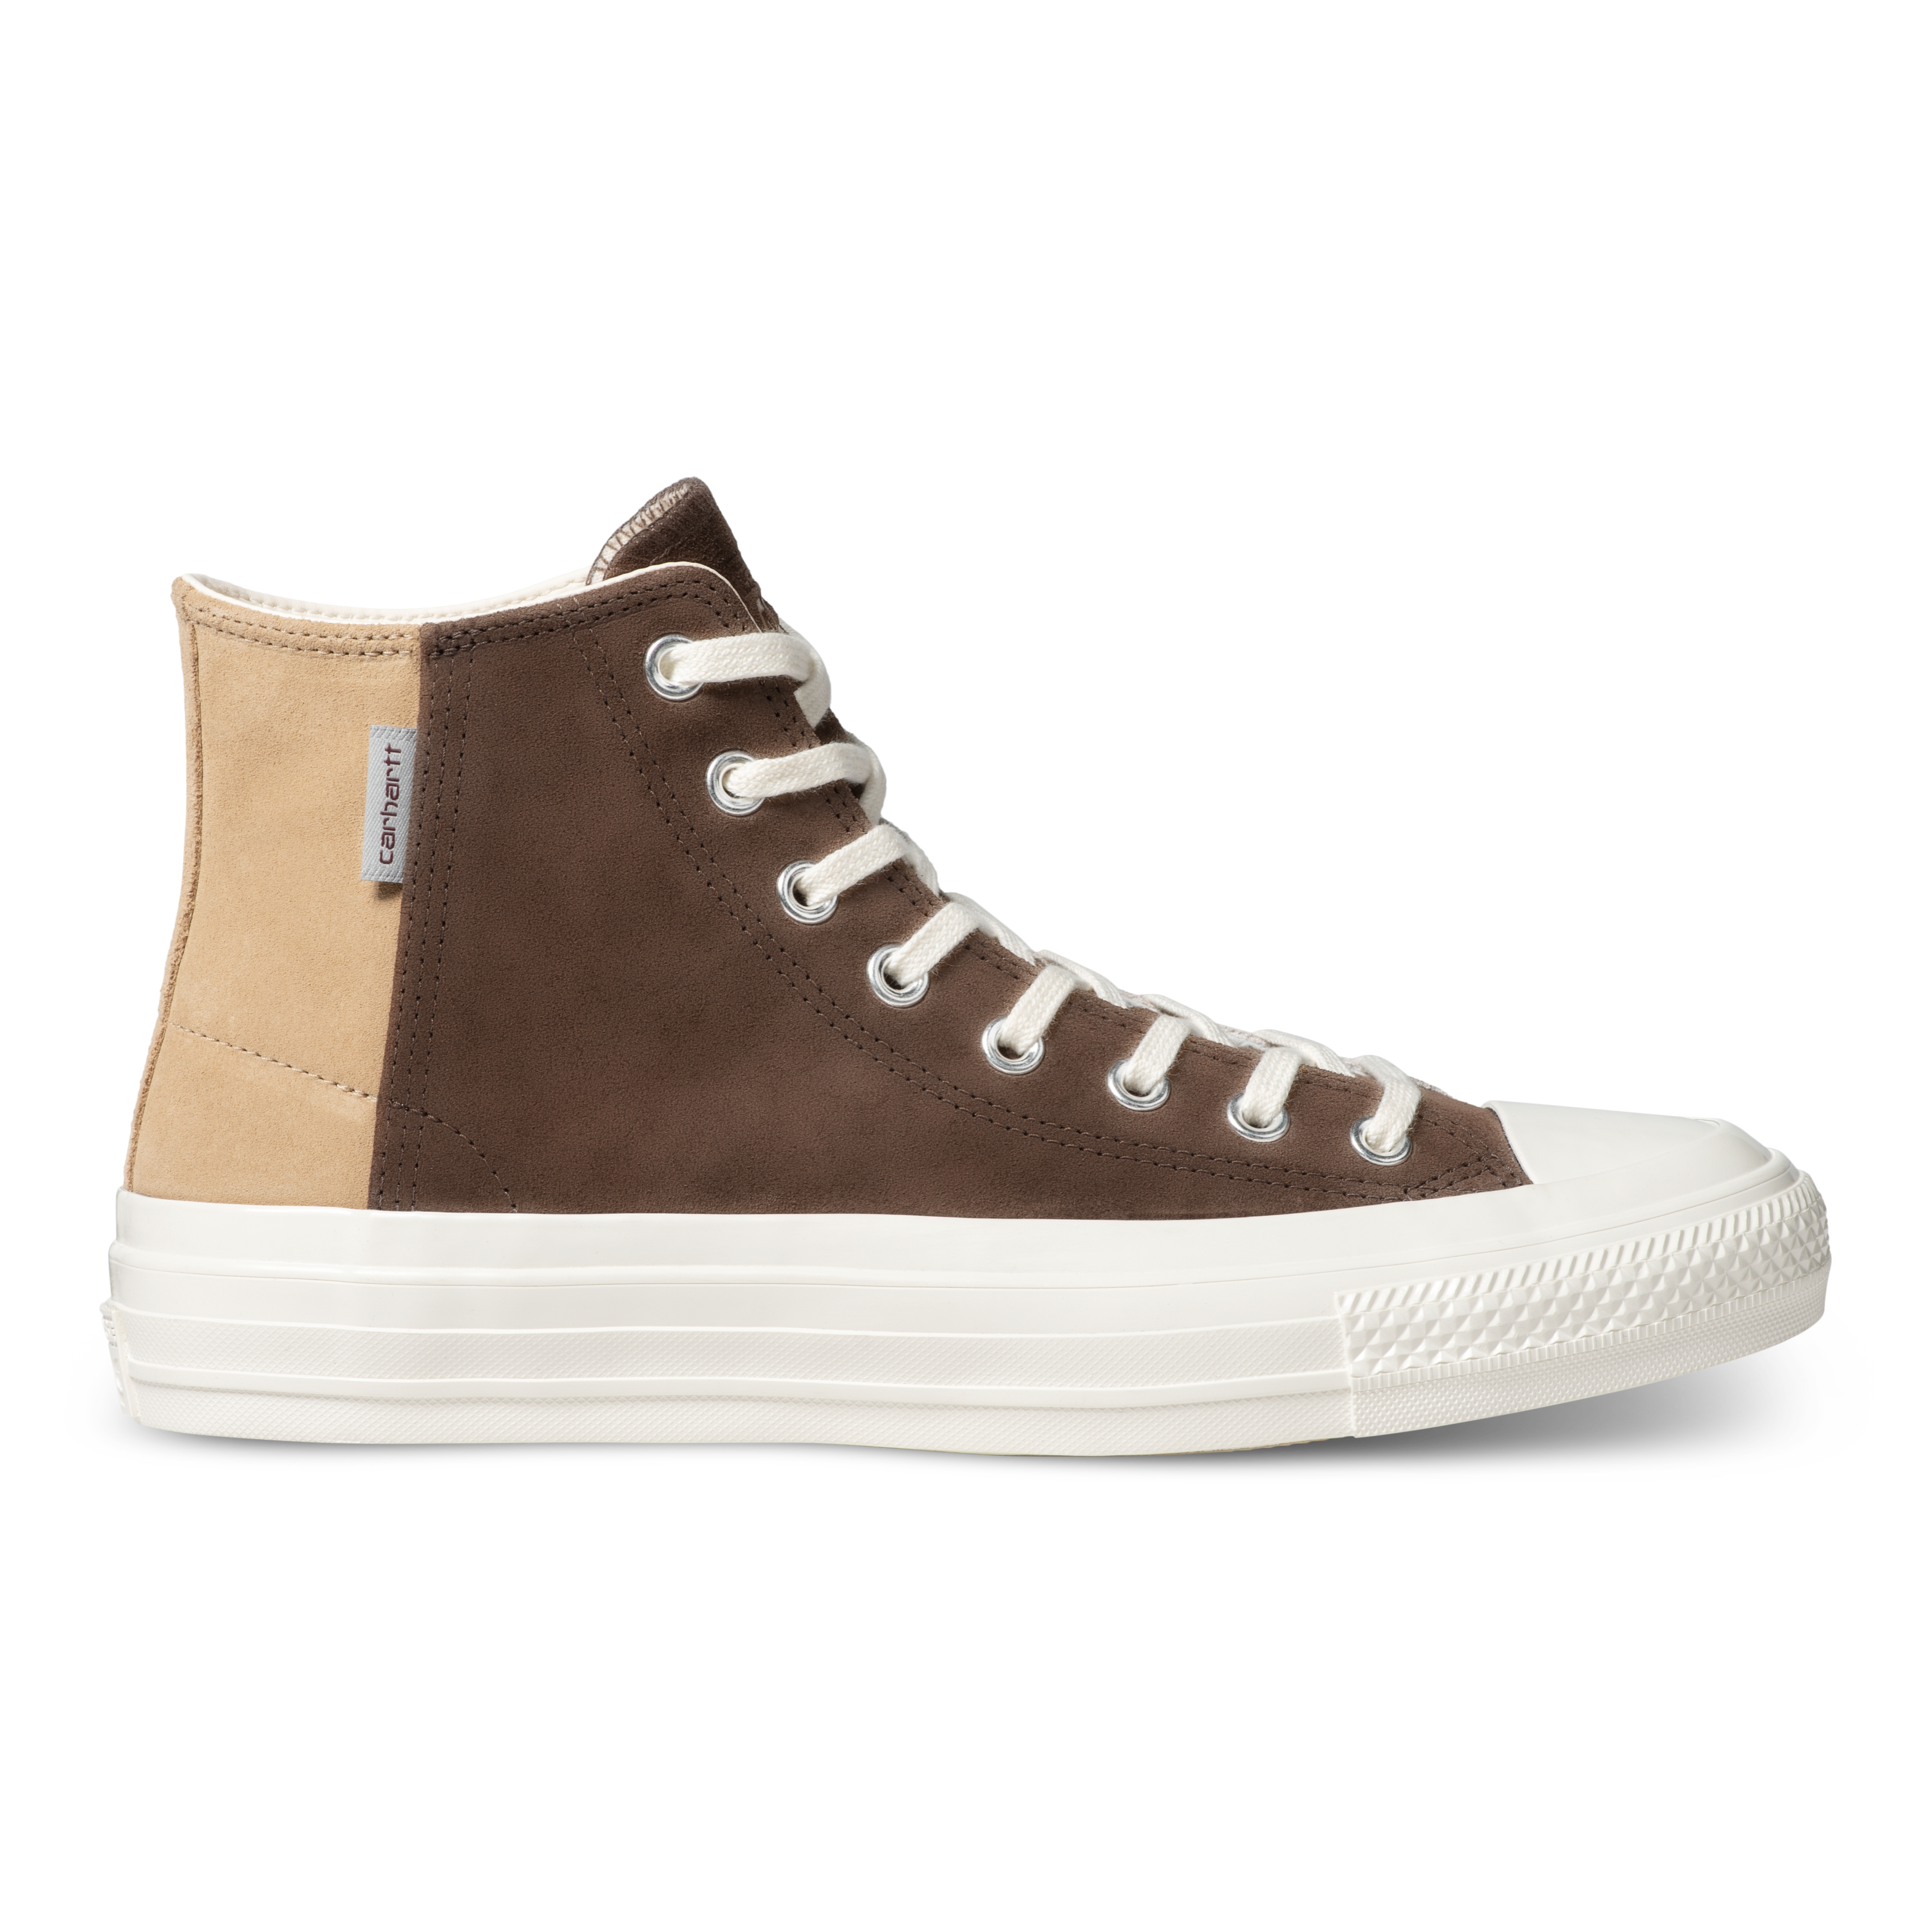 Carhartt WIP Converse CONS x Carhartt WIP Chuck Taylor All Star Pro in Brown